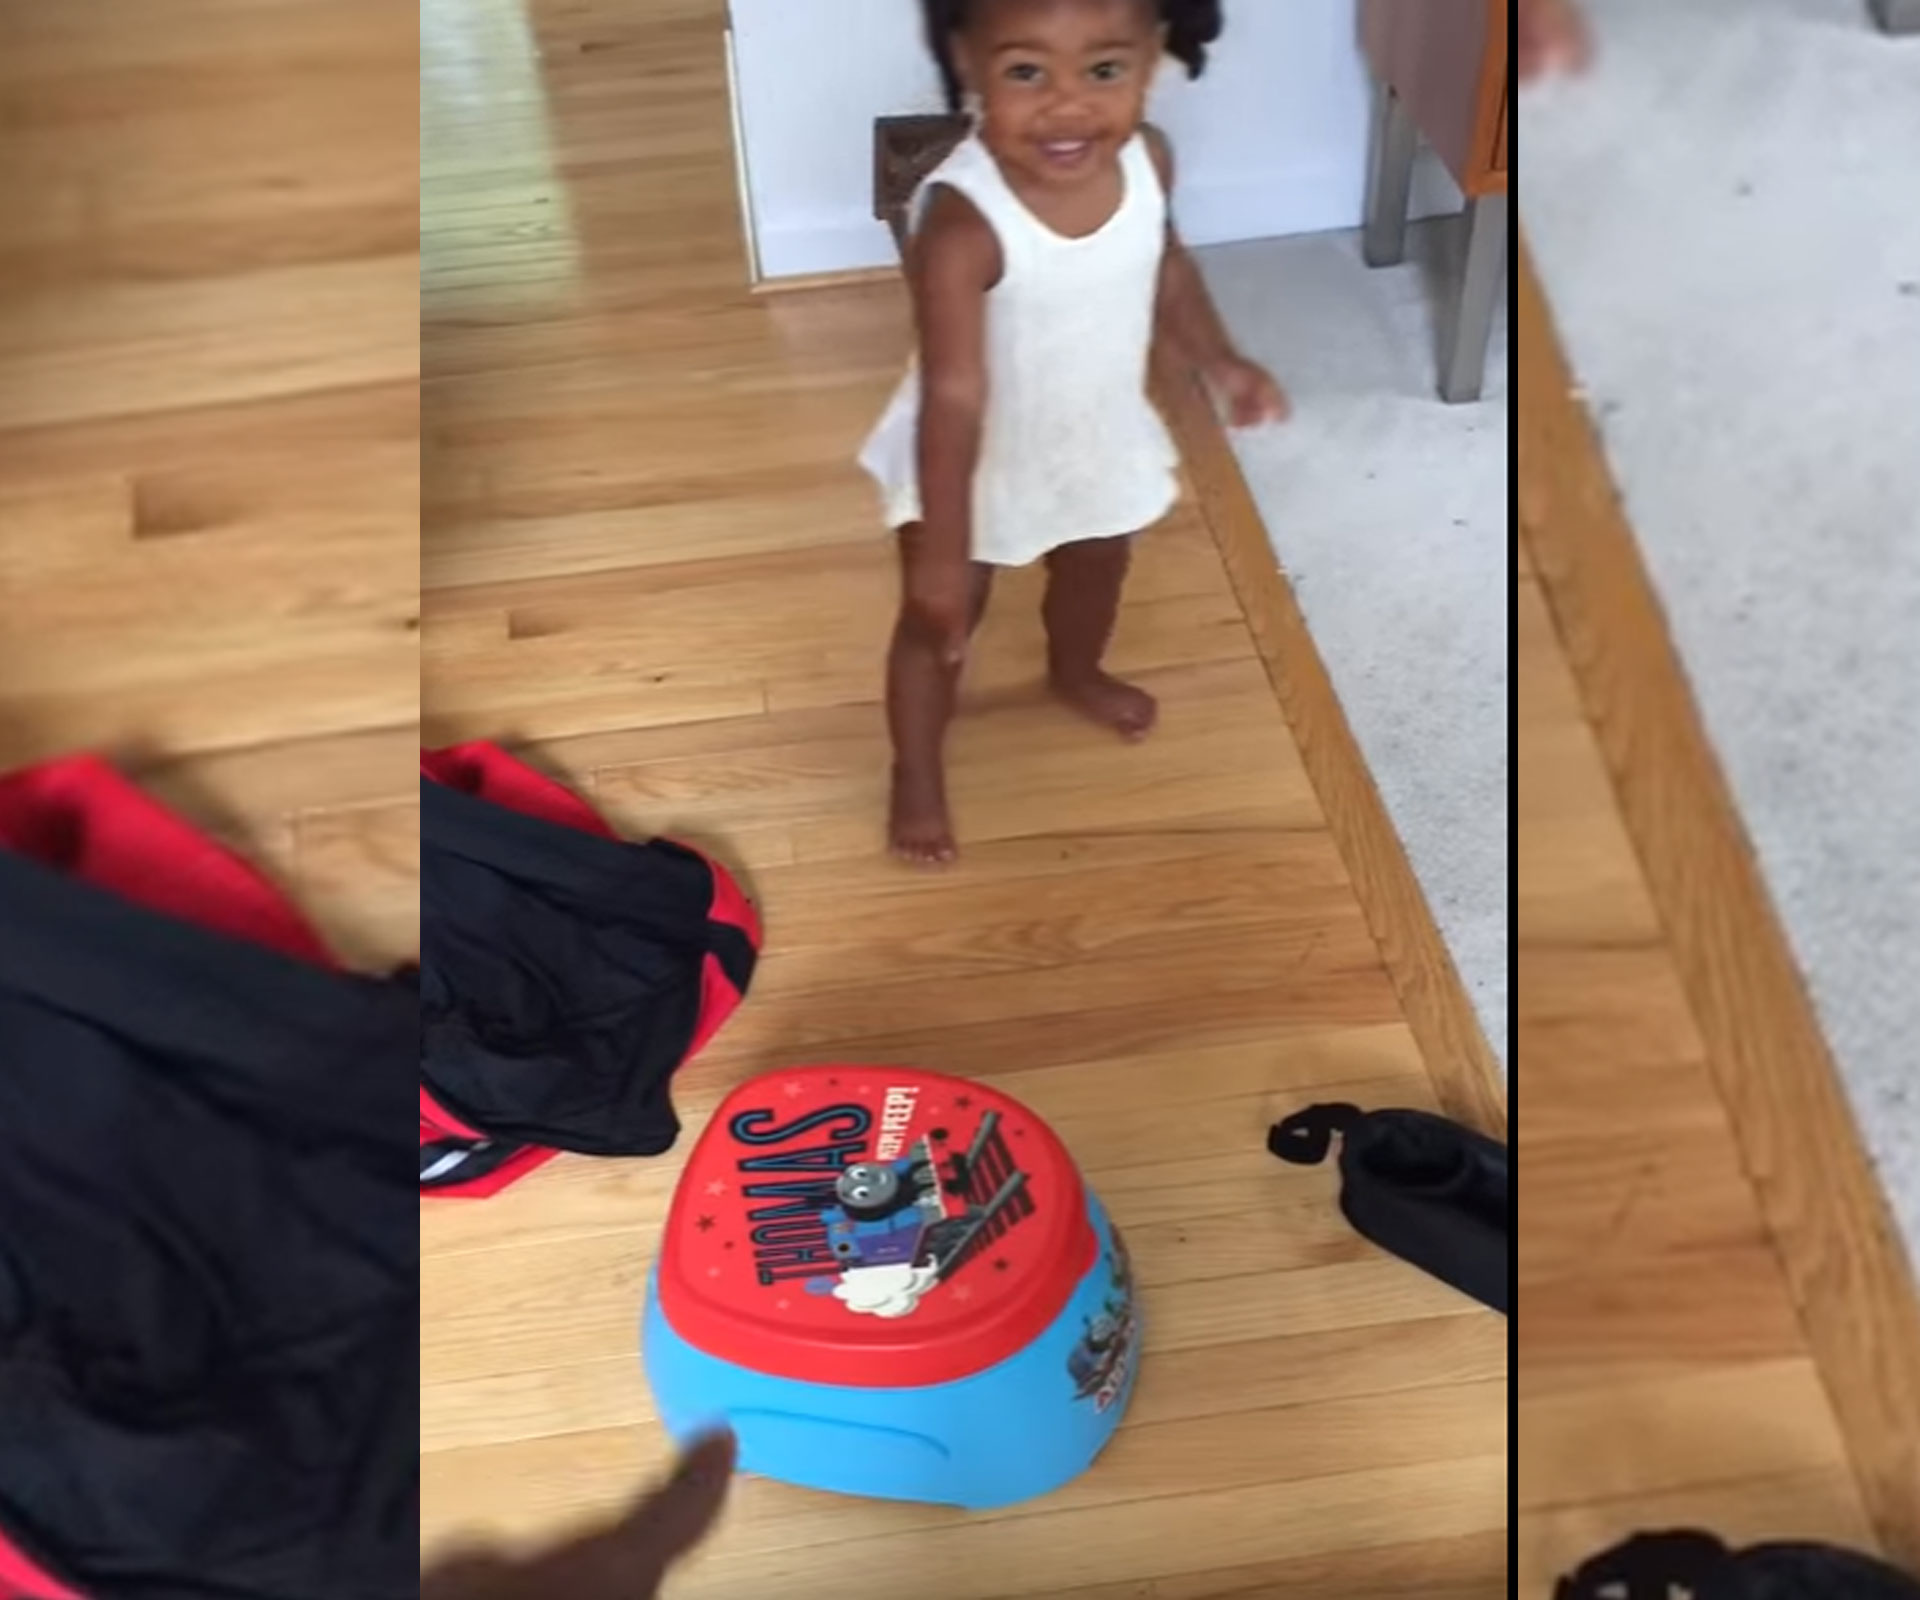 Mum’s catchy potty training song goes viral